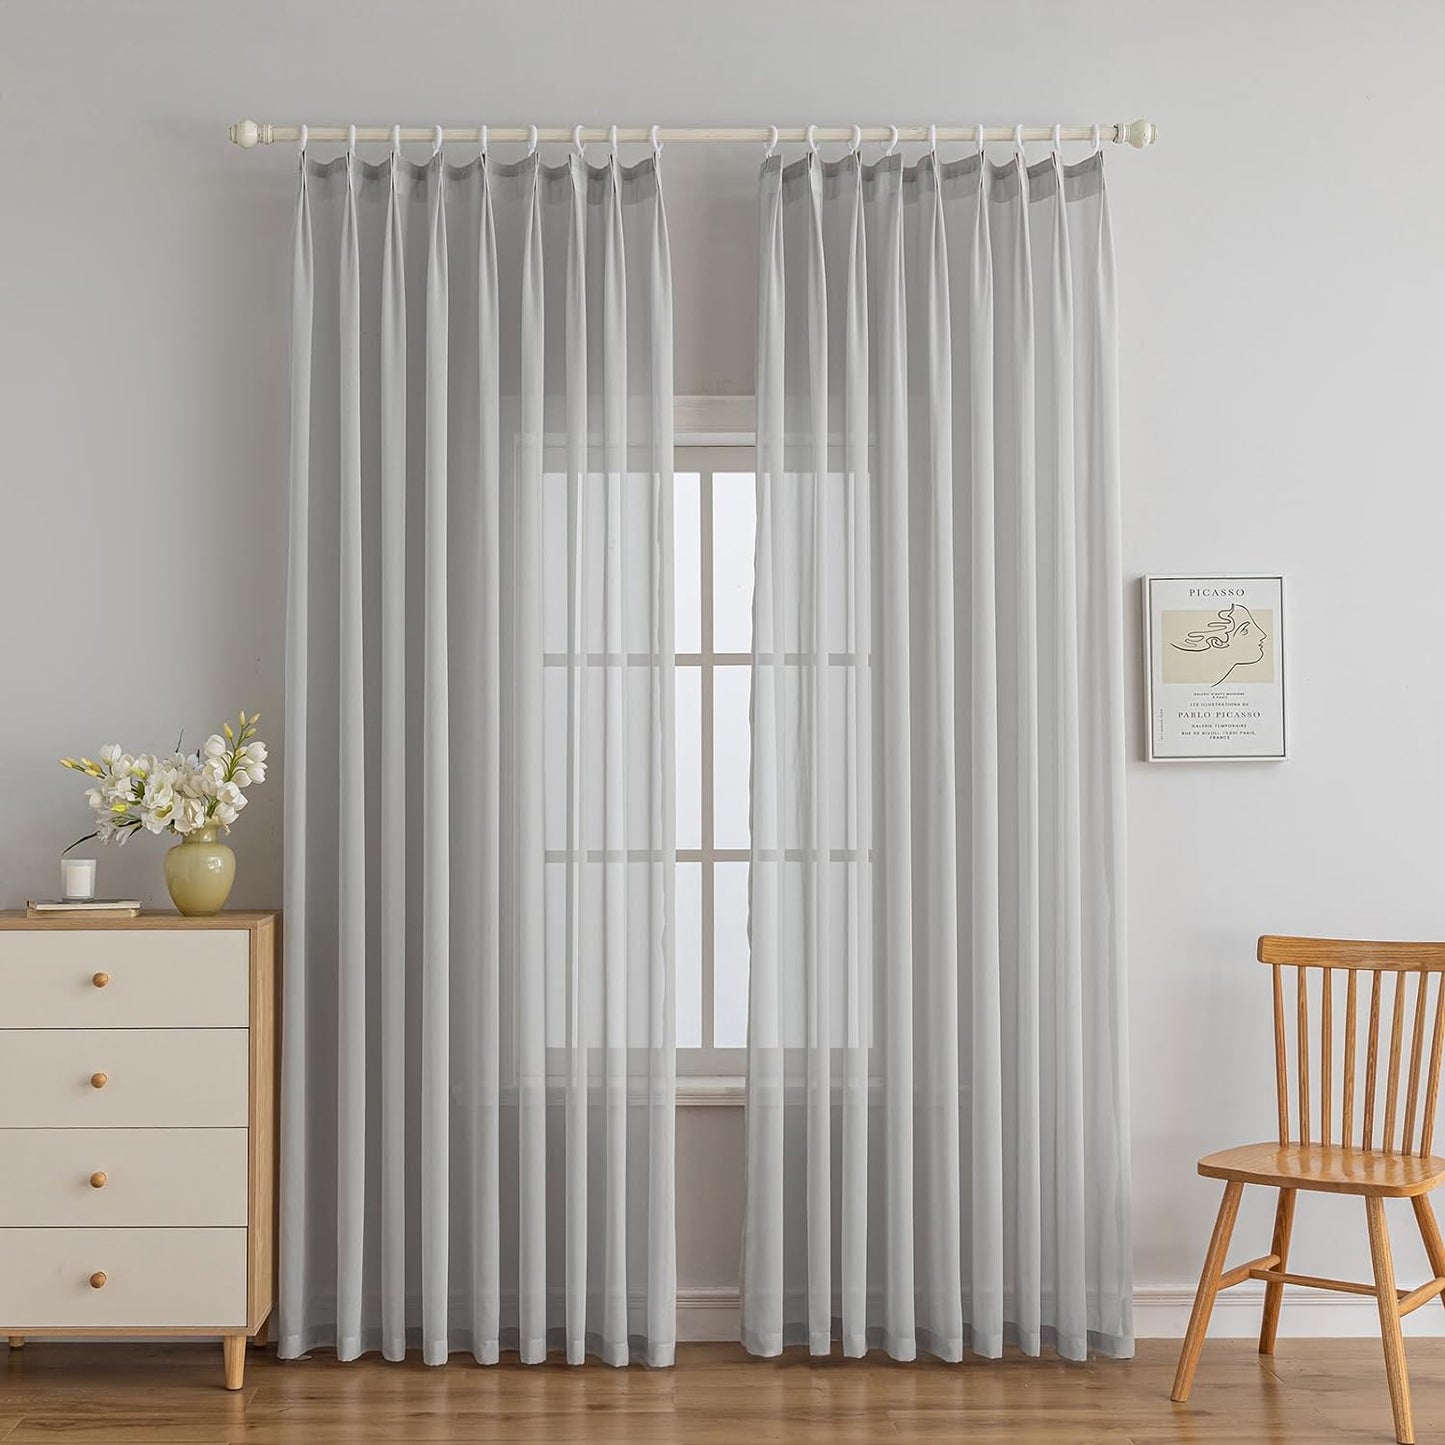 LUGOTAL Pinch Pleated Drapes 108 Inches Long 1 Panel off White Chiffon Sheer Curtains for Living Room and Bedroom Semi-Sheer Light Filtering Curtains & Drapes for Sliding Glass Door, W52 X L108  LUGOTAL Grey (W52" X L90")*1 Panel 